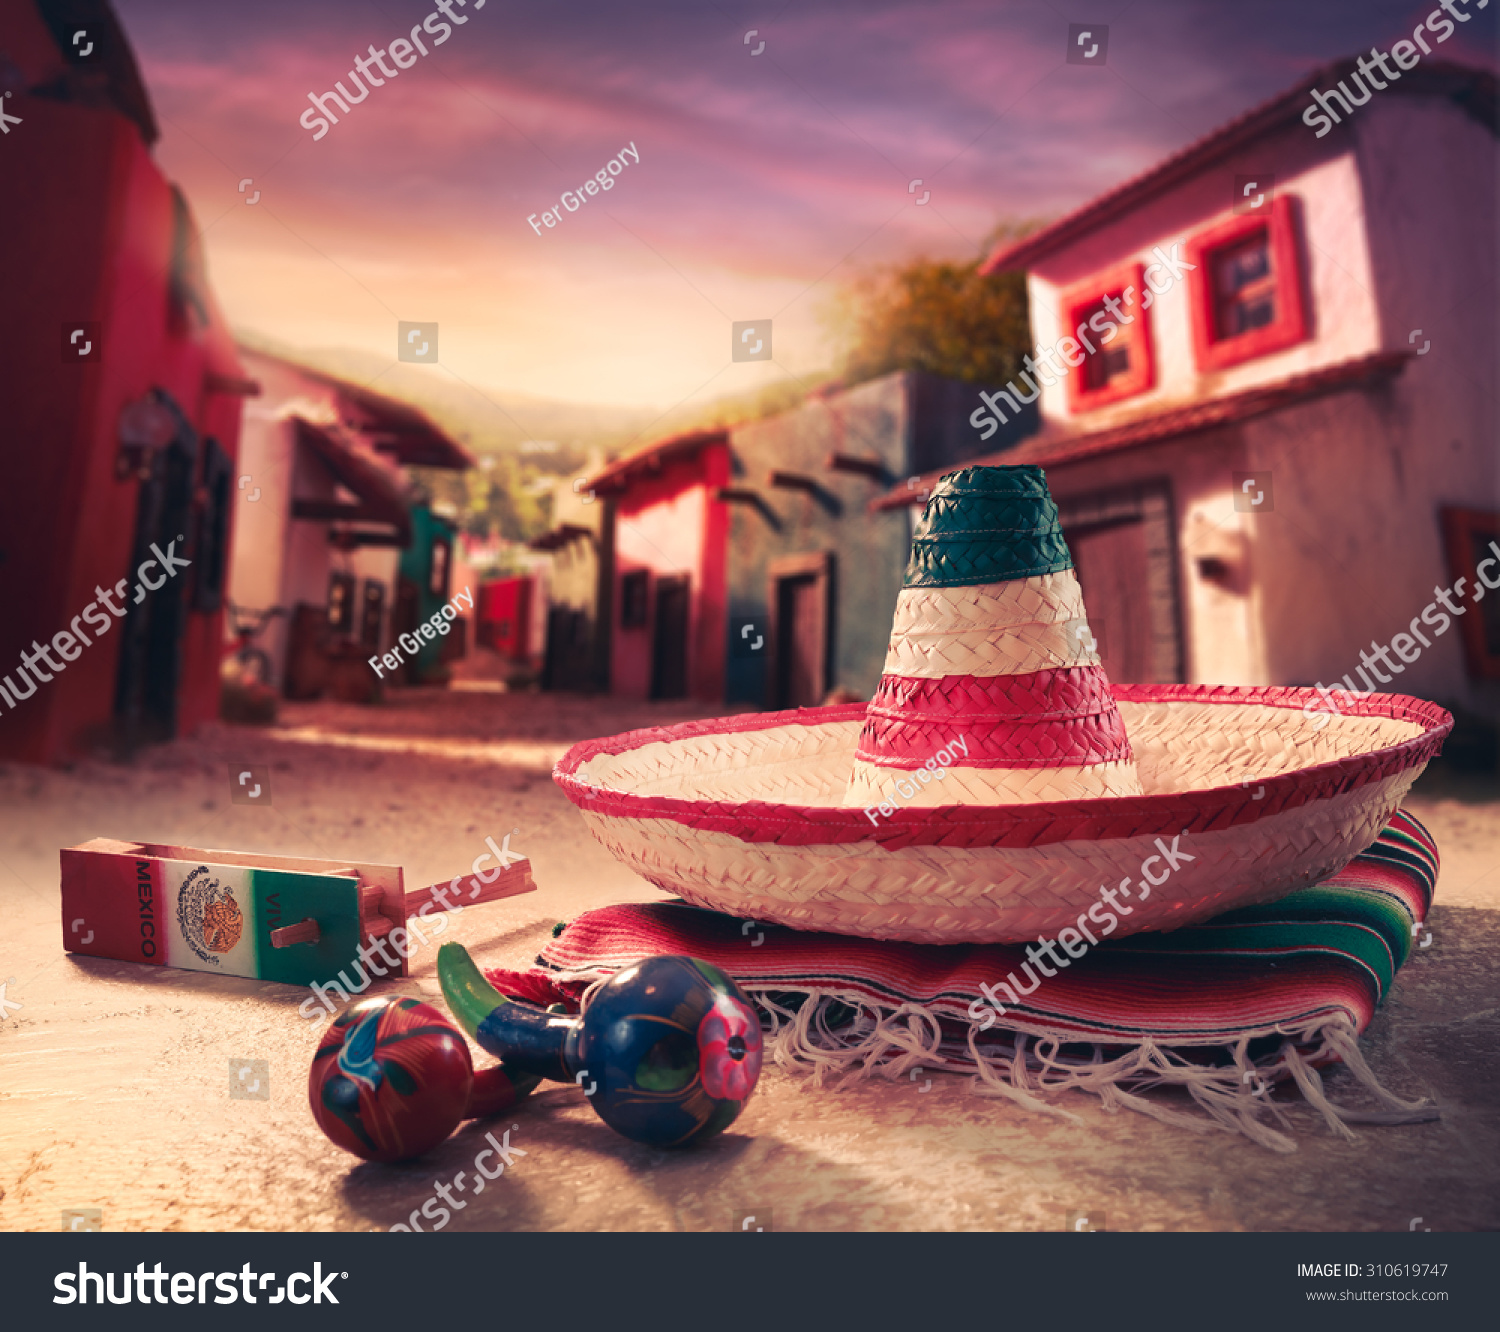 Mexican fiesta background with a hat "sombrero" and "maracas" in a mexican town #310619747